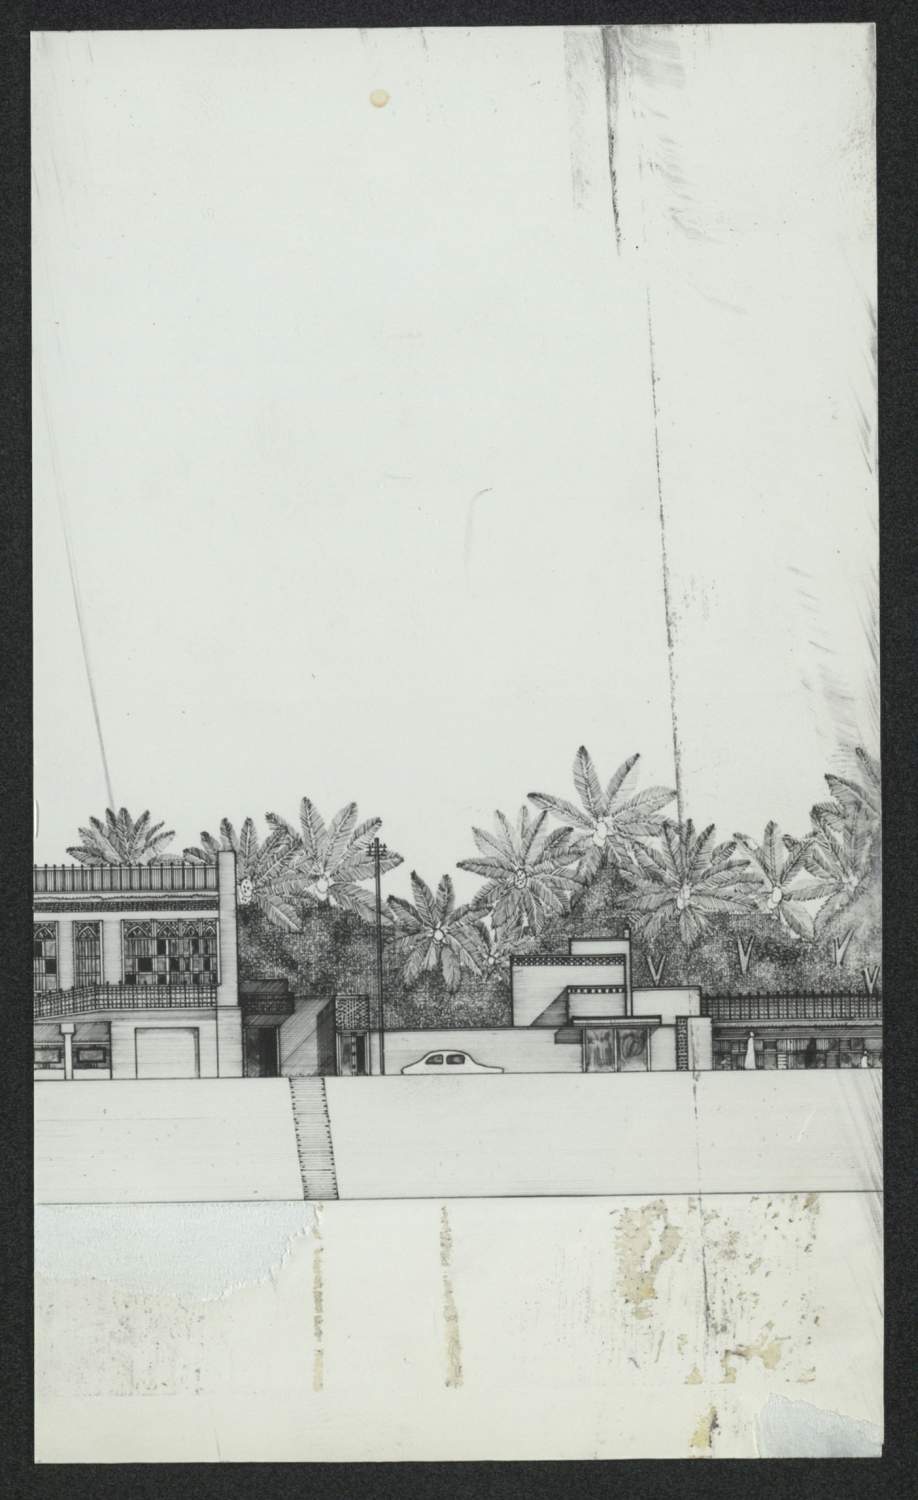 Janin Katana - Baghdad riverfront measured work, part 4 (left to right) of prints on matte photographic paper, or copy 4 of 4 pieces of a drawing (JK.4).